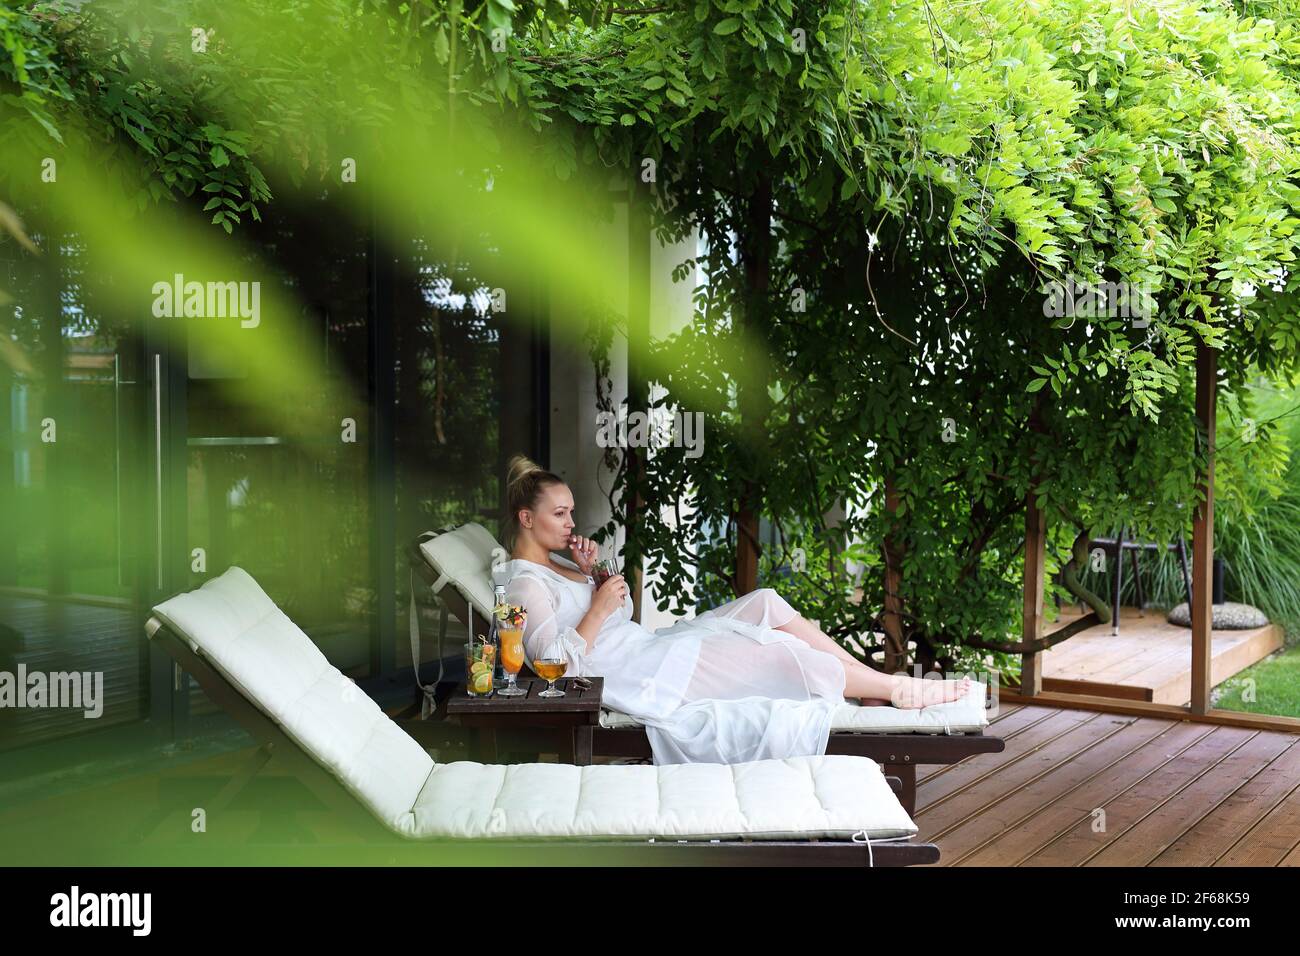 Woman relaxing at the spa. Relax in the garden. Young woman relaxes sitting on a hammock in the green garden. Stock Photo